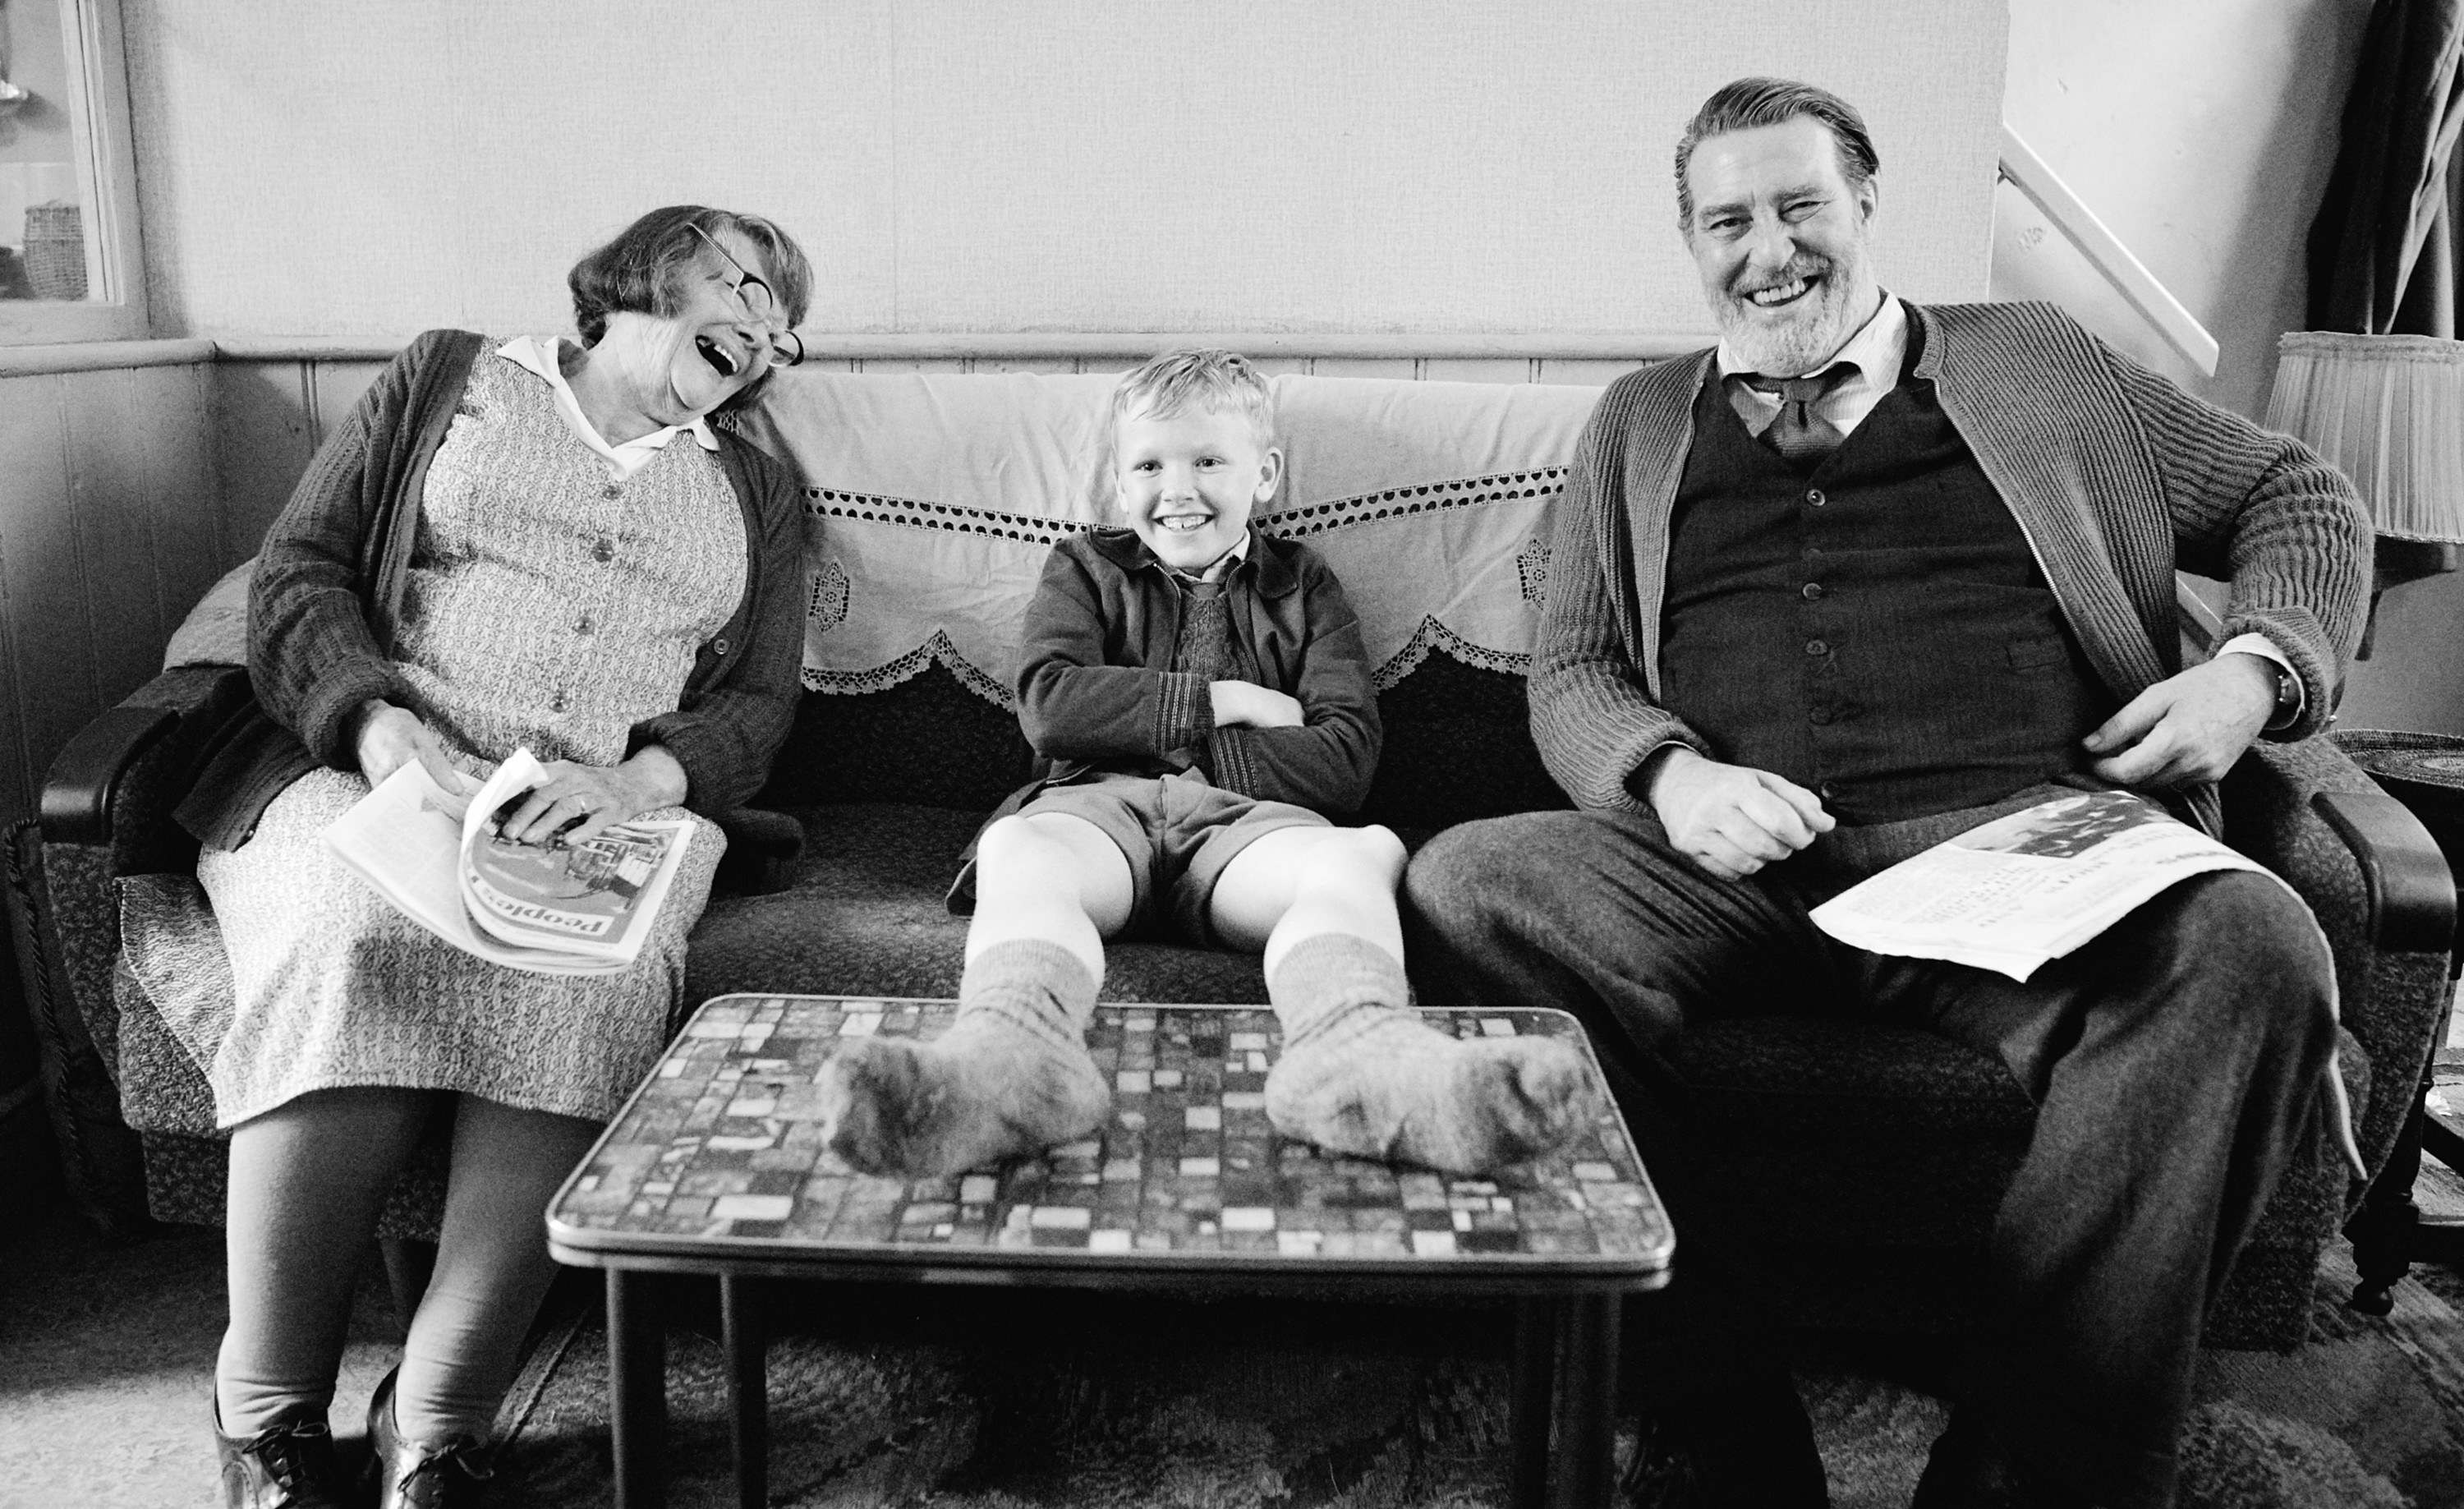 Judi Dench, Jude Hill, and Ciaran Hinds laugh together on a couch